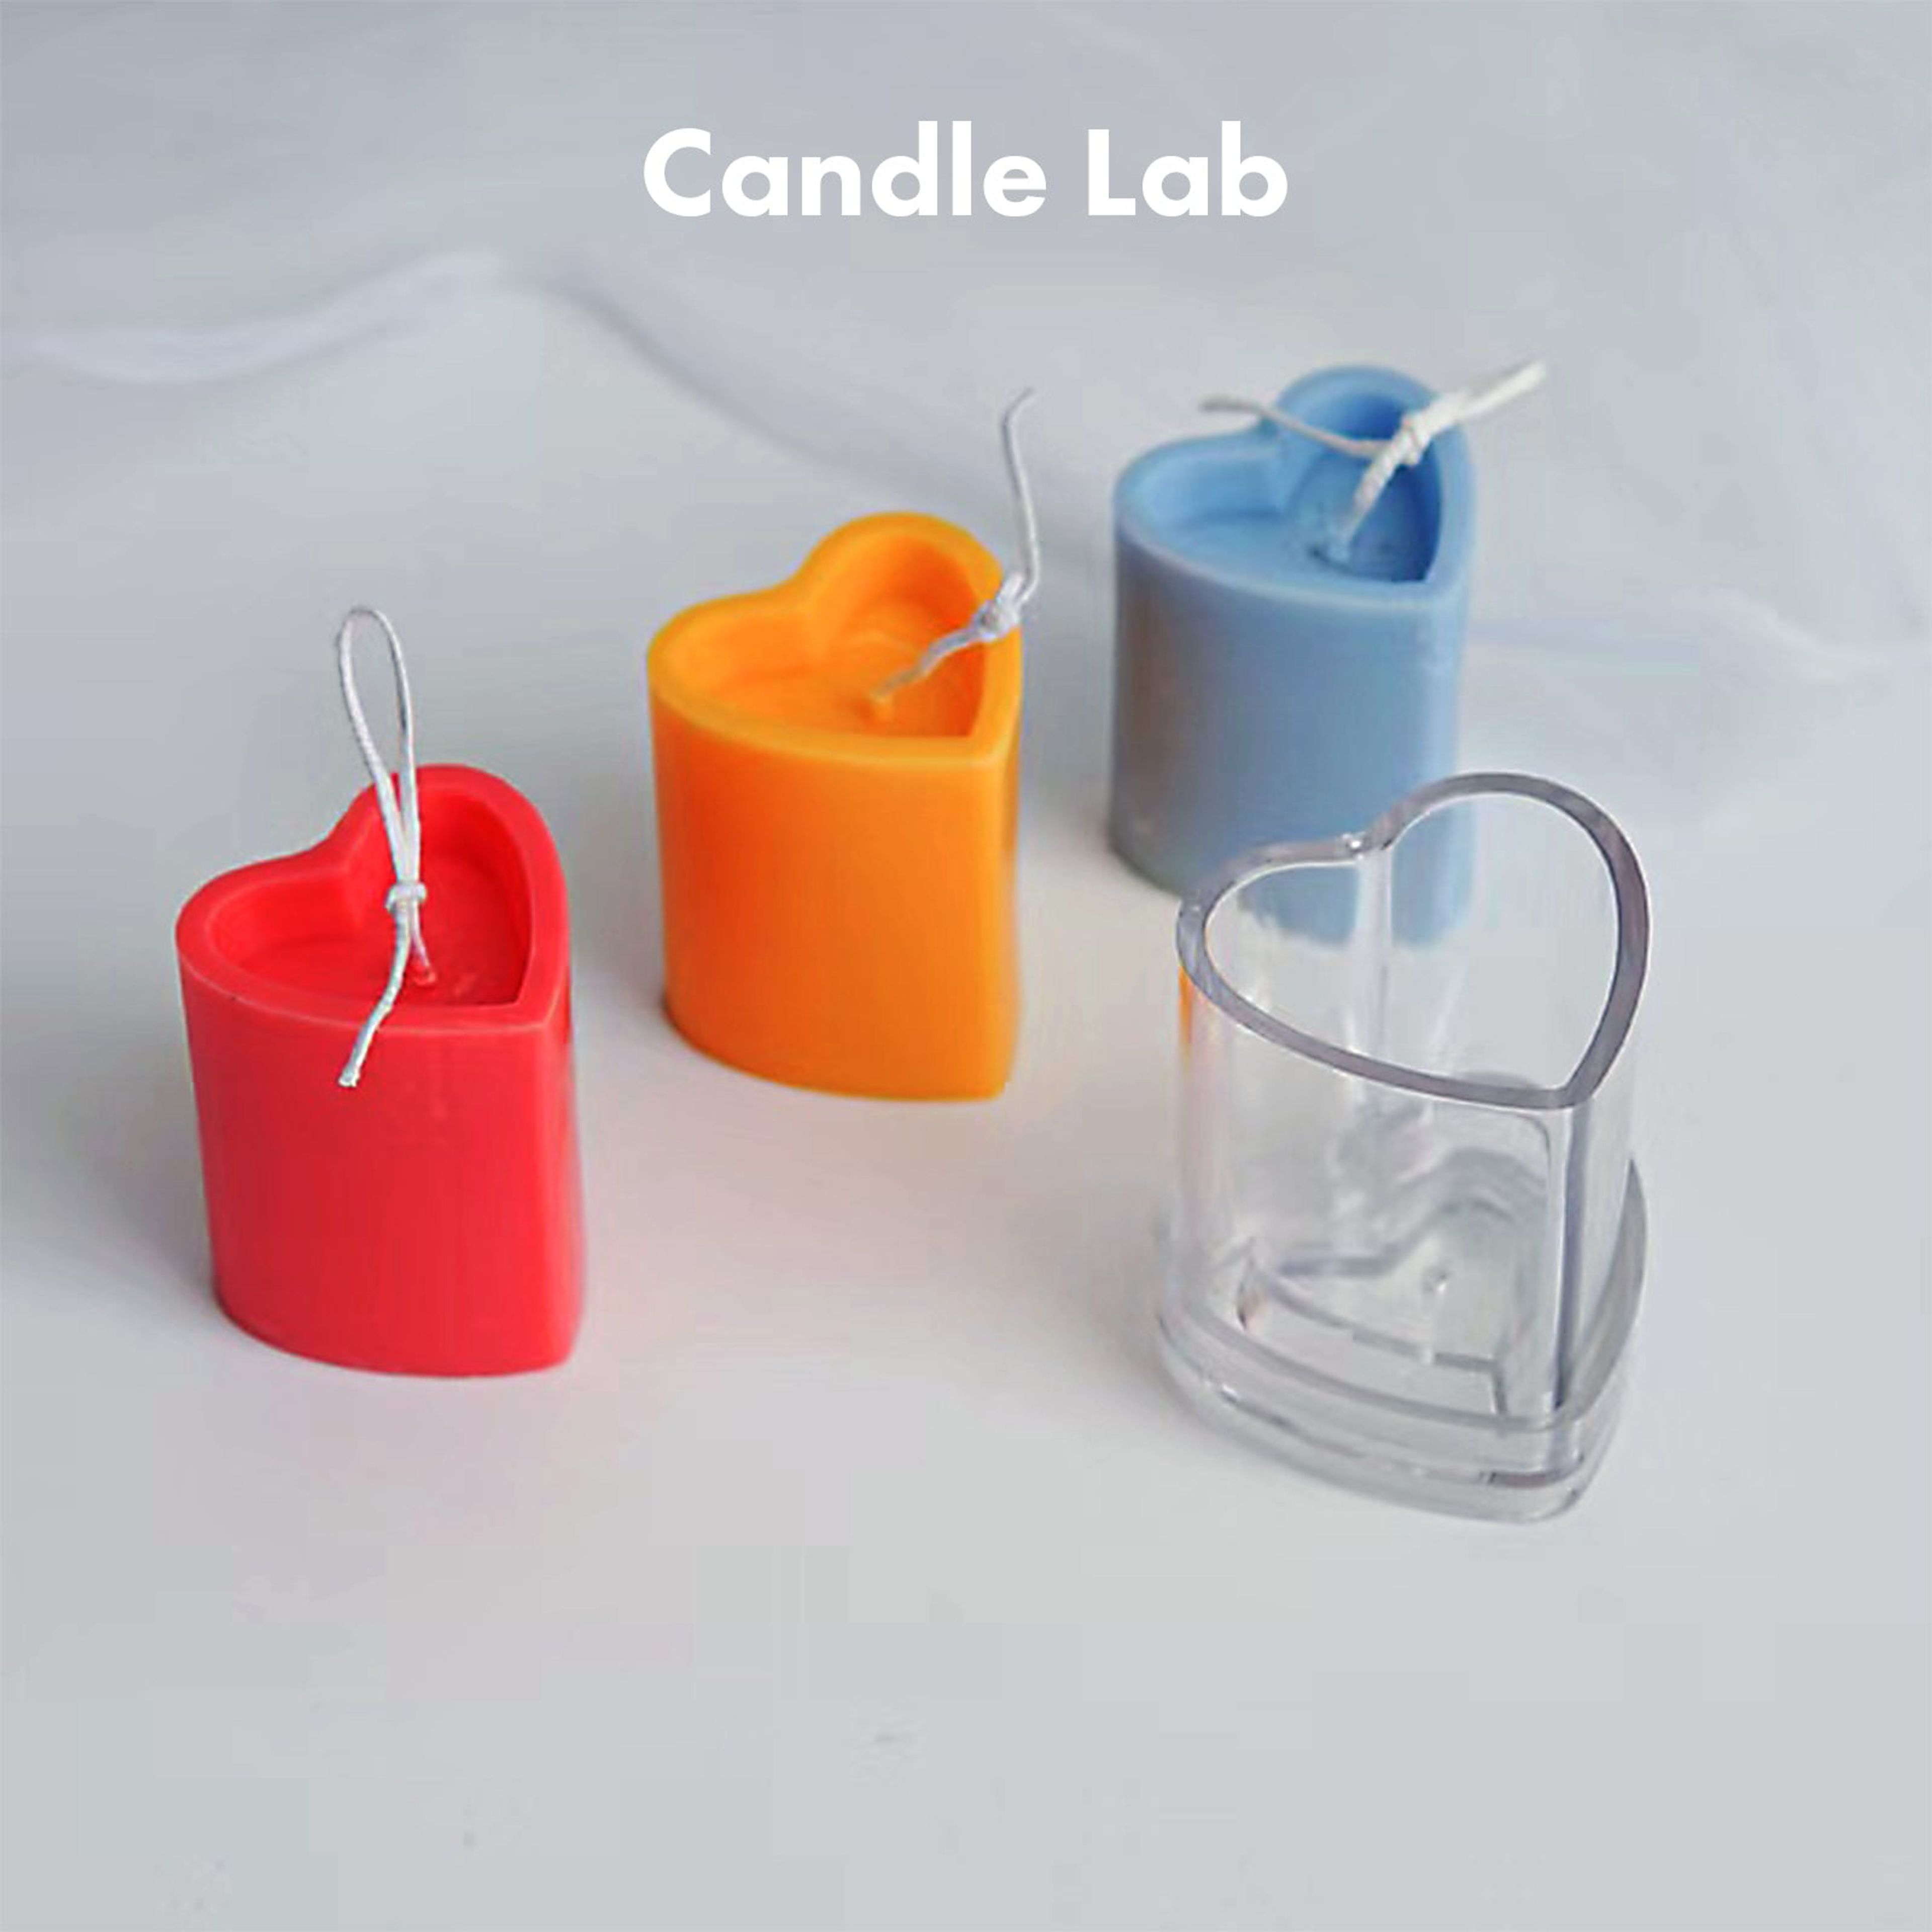 Candle Lab | Heart concave Candle Mold Acrylic Plastic Column Candle Making Tool Handmade Soap Mold for DIY Crafts Clay, Clear